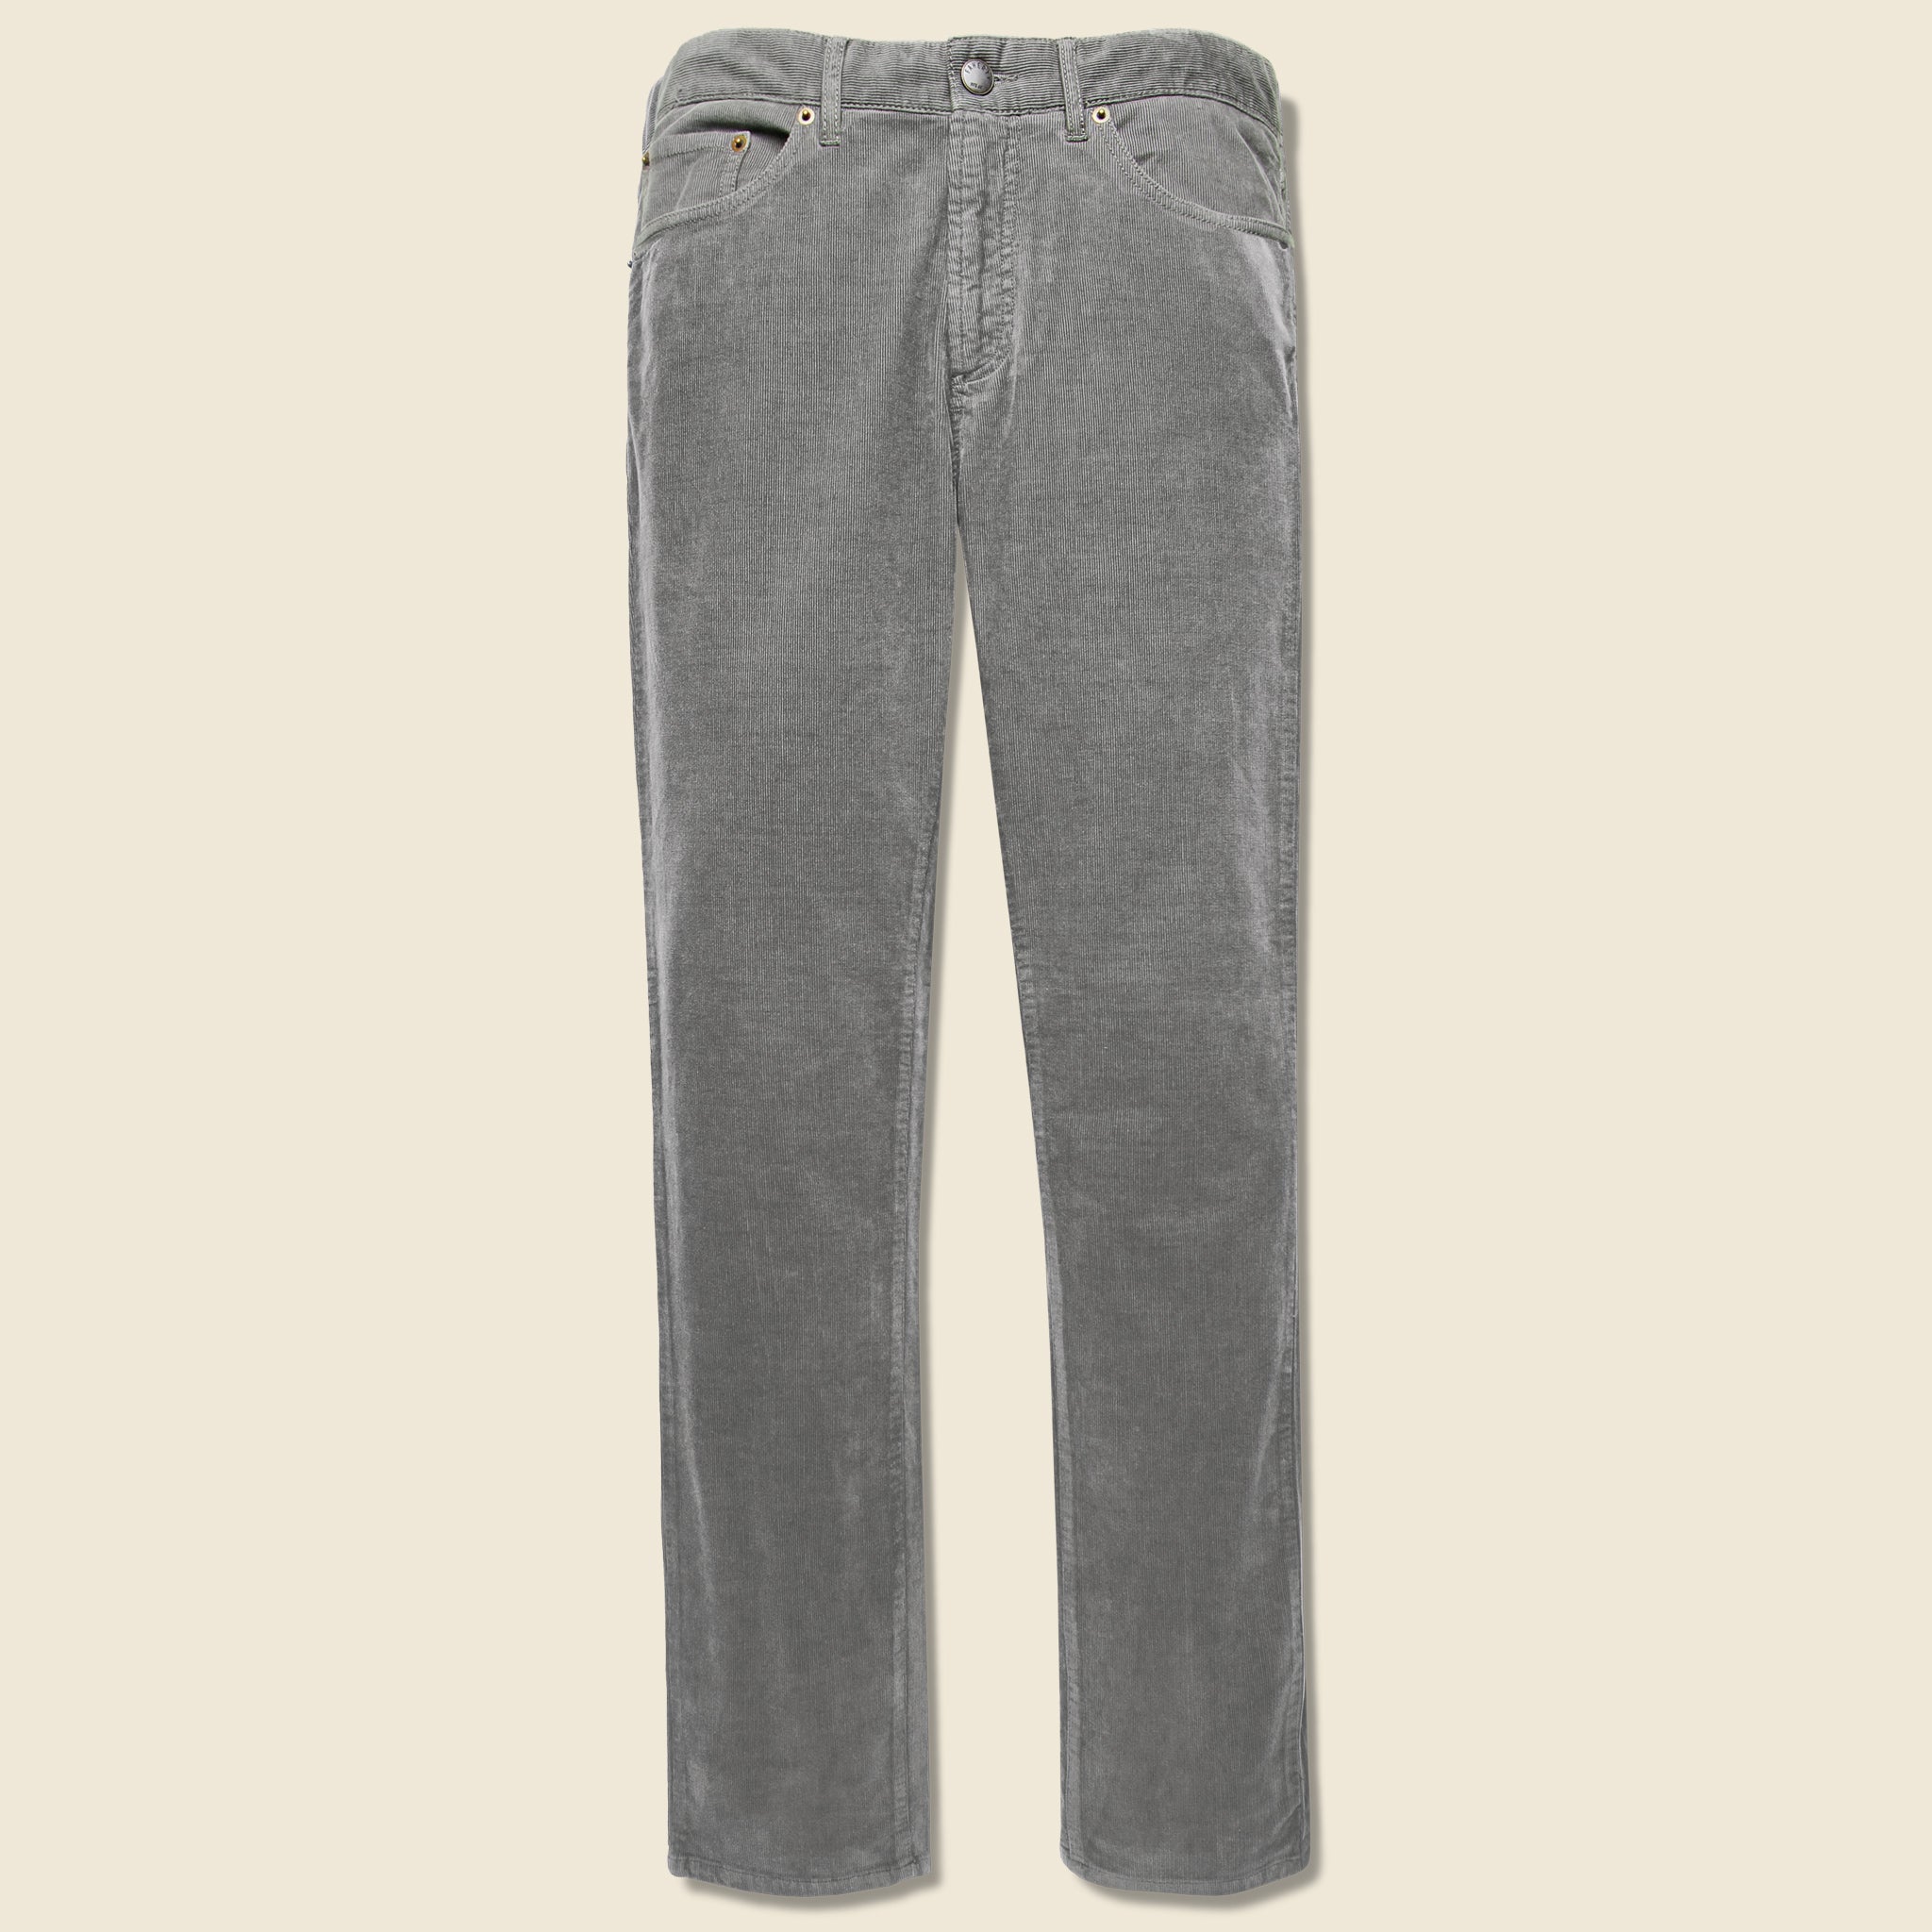 grey cord jeans